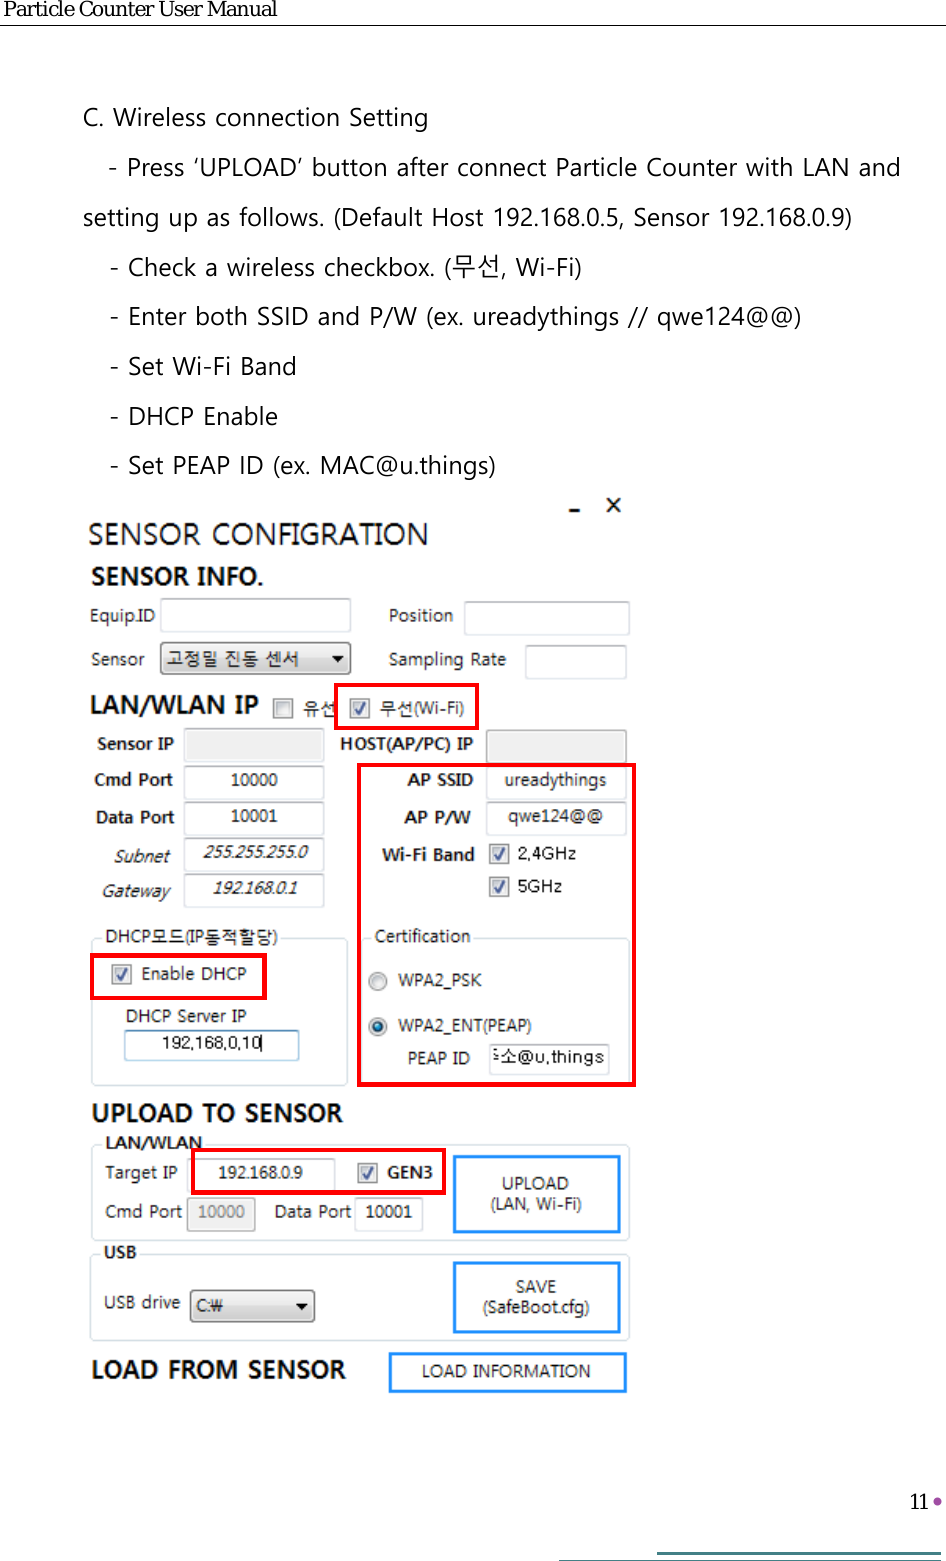 Particle Counter User Manual   11     C. Wireless connection Setting - Press ‘UPLOAD’ button after connect Particle Counter with LAN and setting up as follows. (Default Host 192.168.0.5, Sensor 192.168.0.9)    - Check a wireless checkbox. (무선, Wi-Fi)    - Enter both SSID and P/W (ex. ureadythings // qwe124@@)    - Set Wi-Fi Band    - DHCP Enable    - Set PEAP ID (ex. MAC@u.things)  